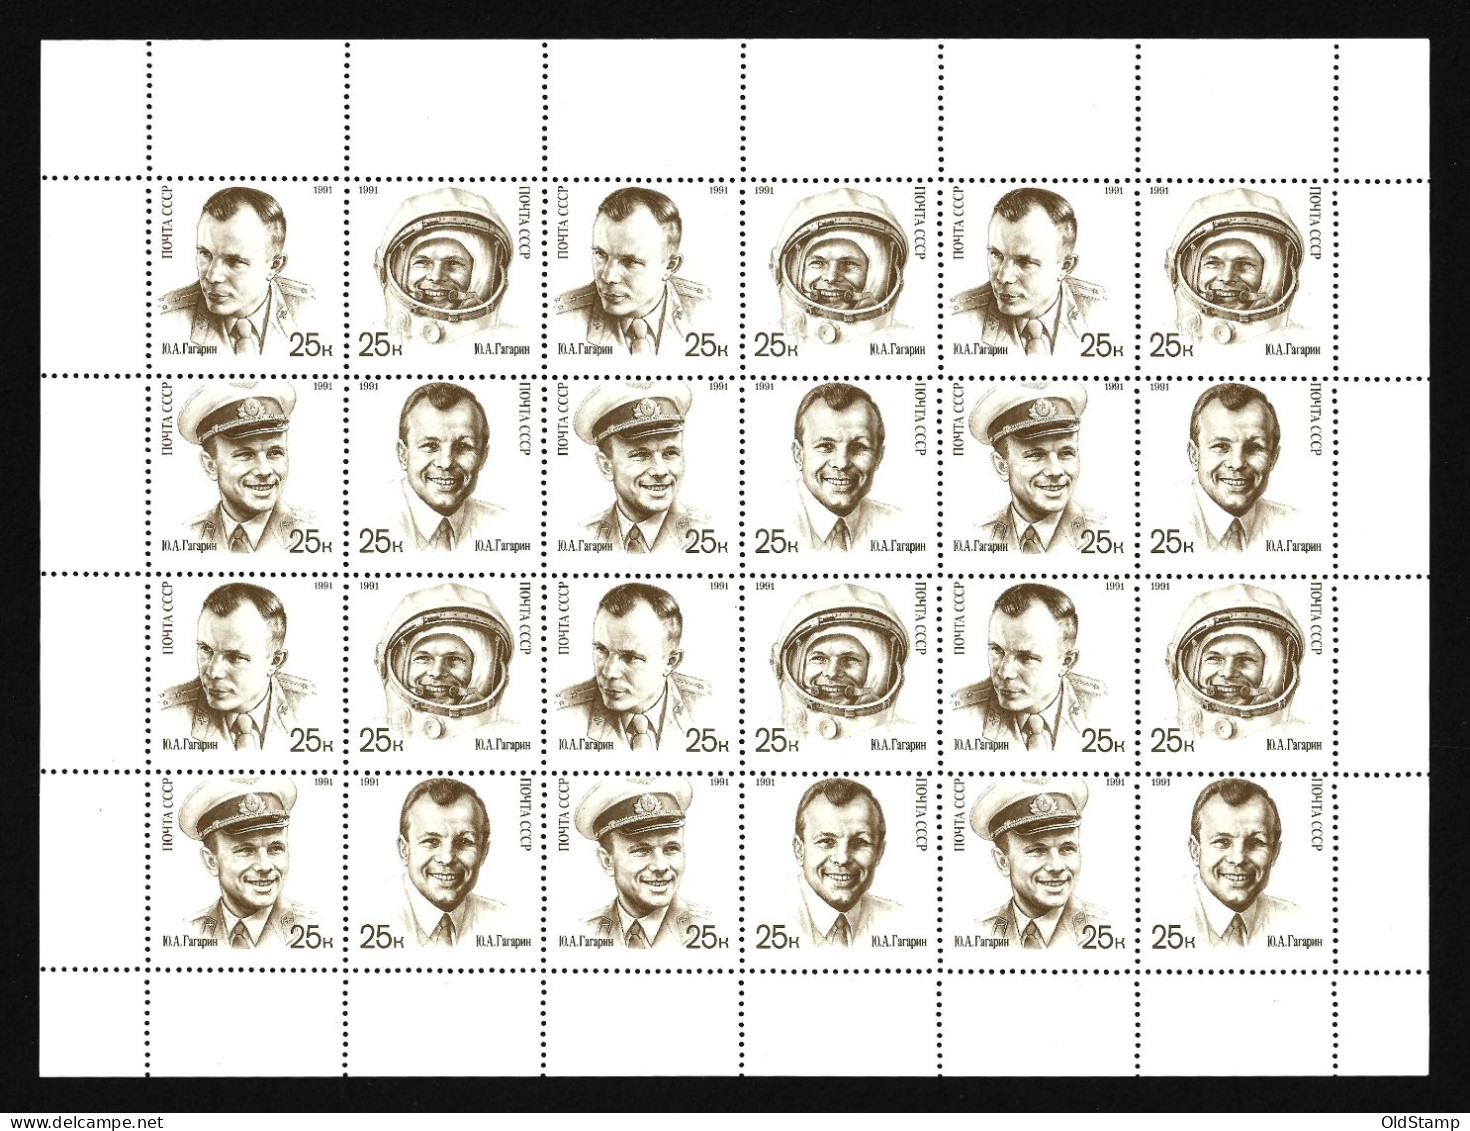 SPACE USSR Russia 1991 Full Sheet MNH Gagarin 30th Anniversary First Man In Space Cosmonautics Stamps Mi. 6185 - 6188 - Collezioni